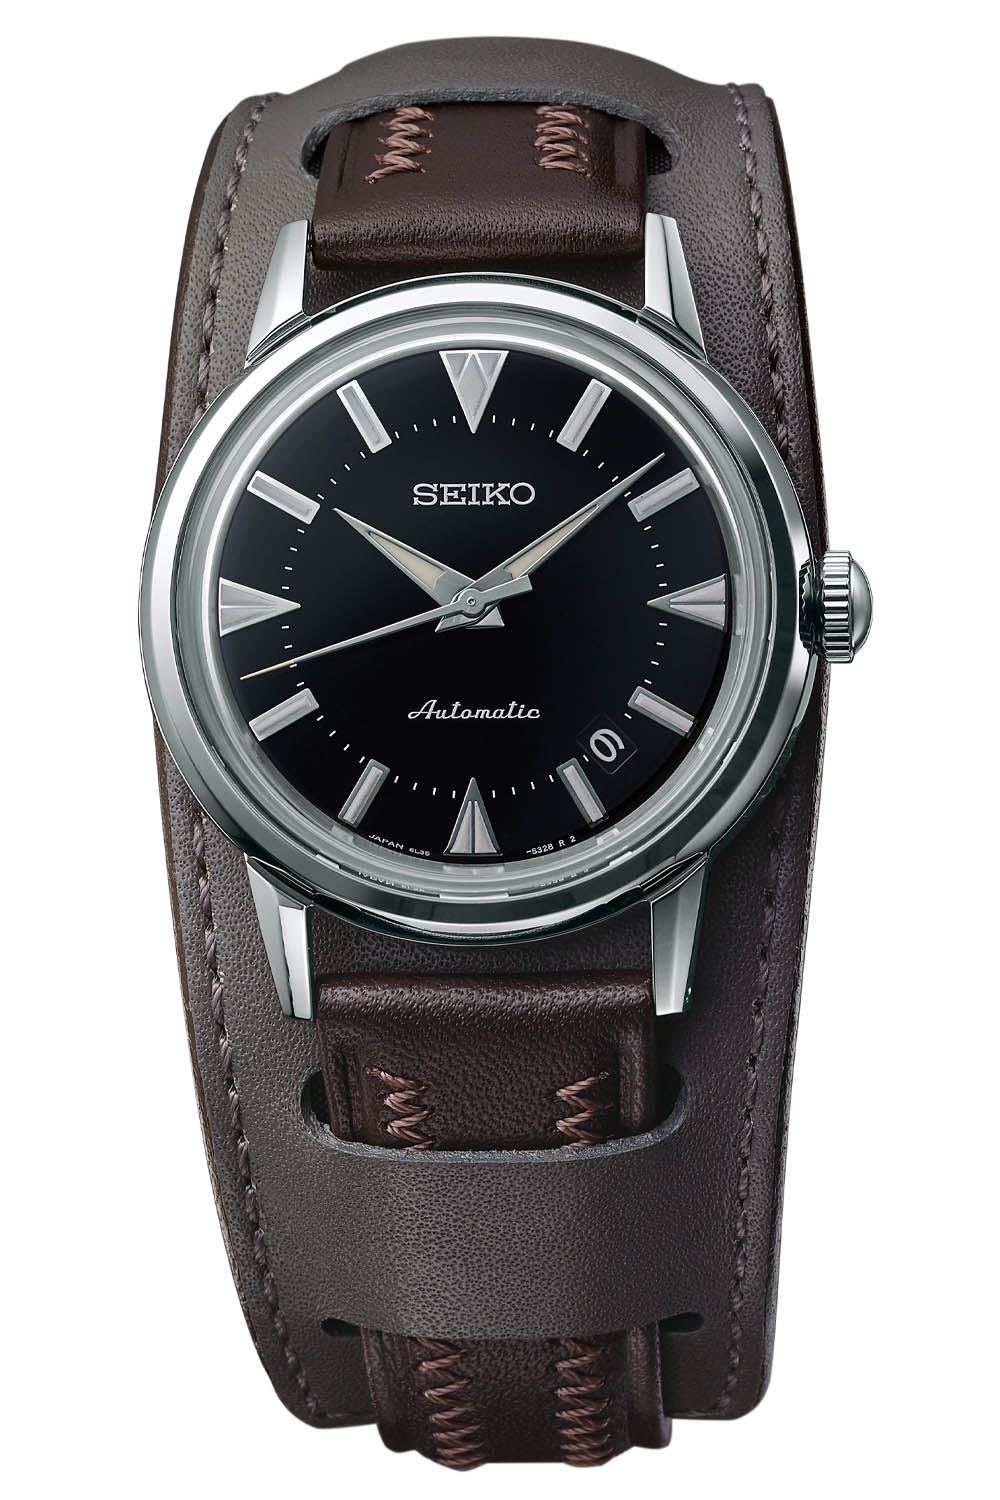 Introducing The Seiko Alpinist Prospex 1959 Re-Creation Watches –  WristReview.com – Featuring Watch Reviews, Critiques, Reports & News